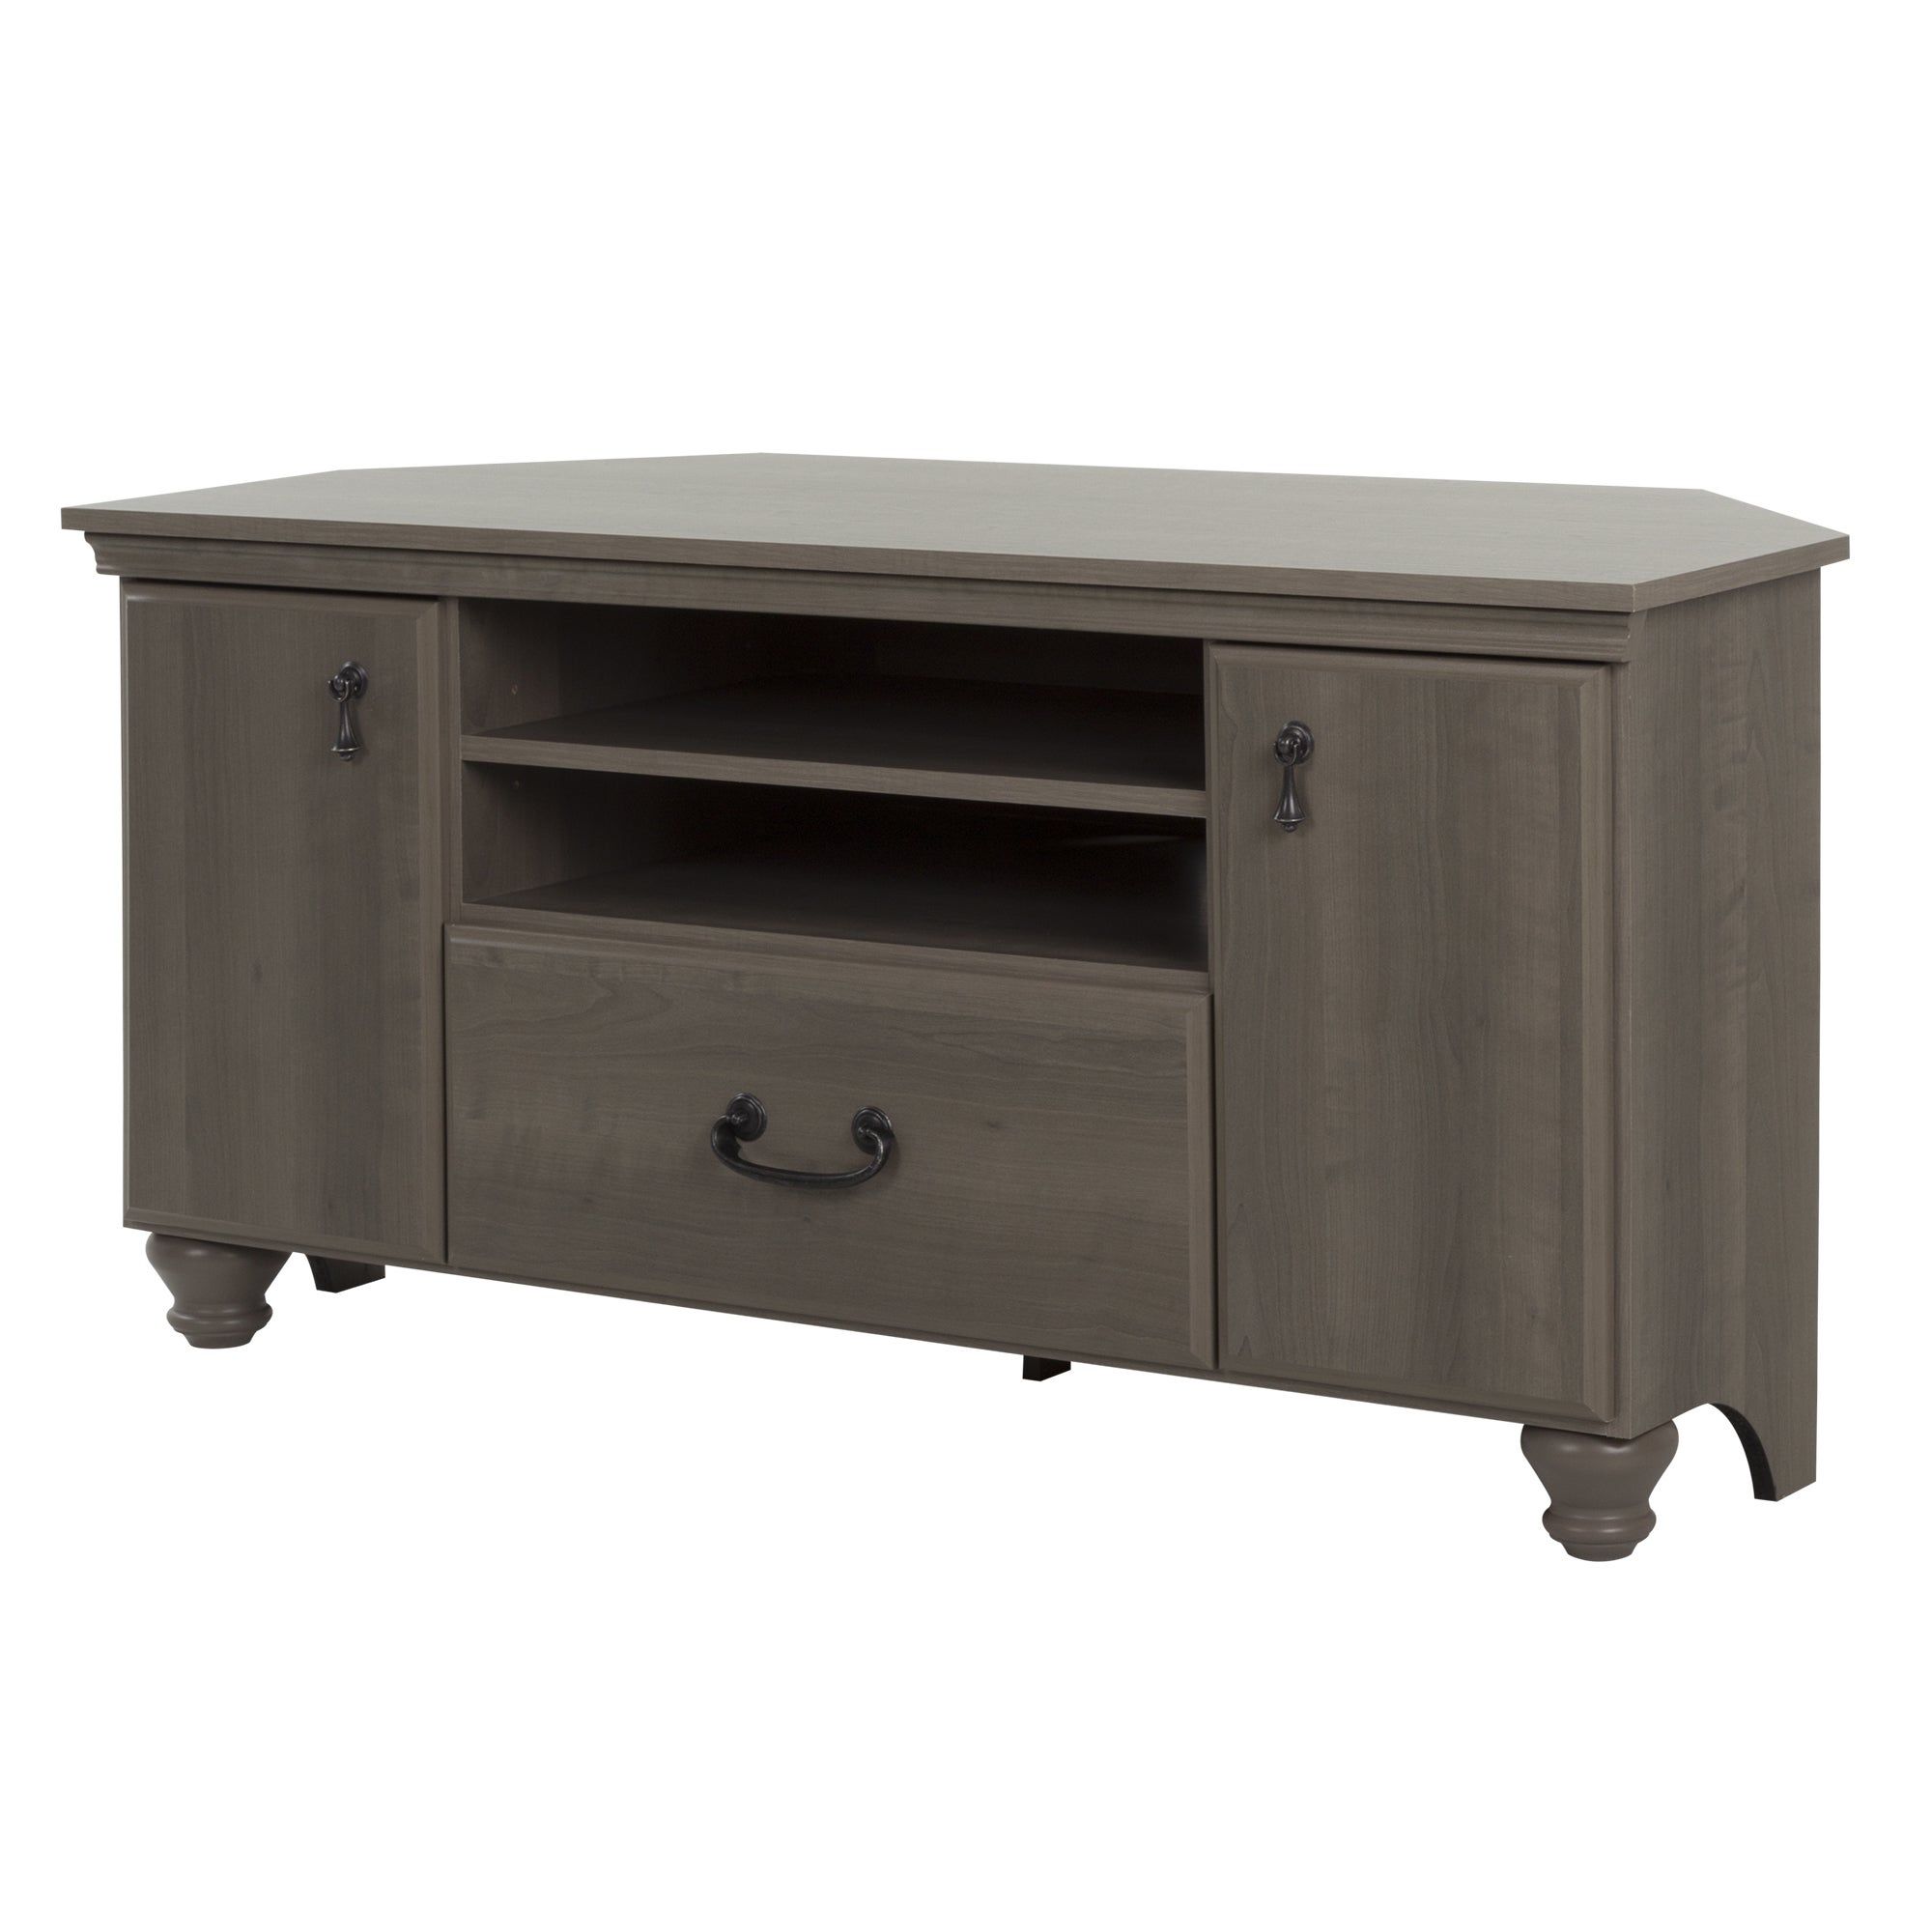 South Shore Grey Laminate Corner Tv Stand With Adjustable Throughout Grey Corner Tv Stands (View 2 of 15)